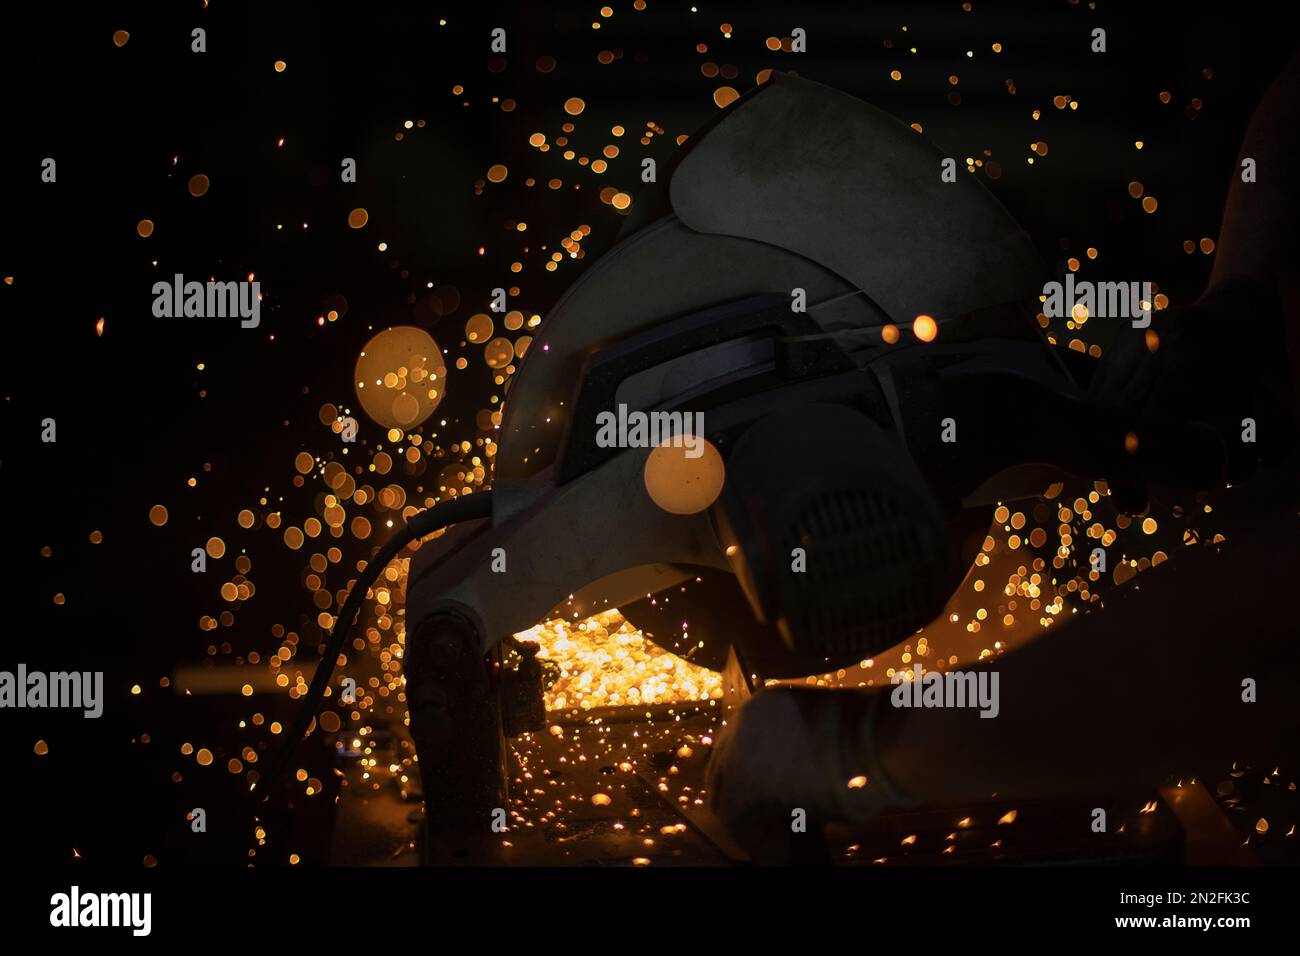 Sparks from welding. Metal cutting. Production details. Industrial background. Stock Photo